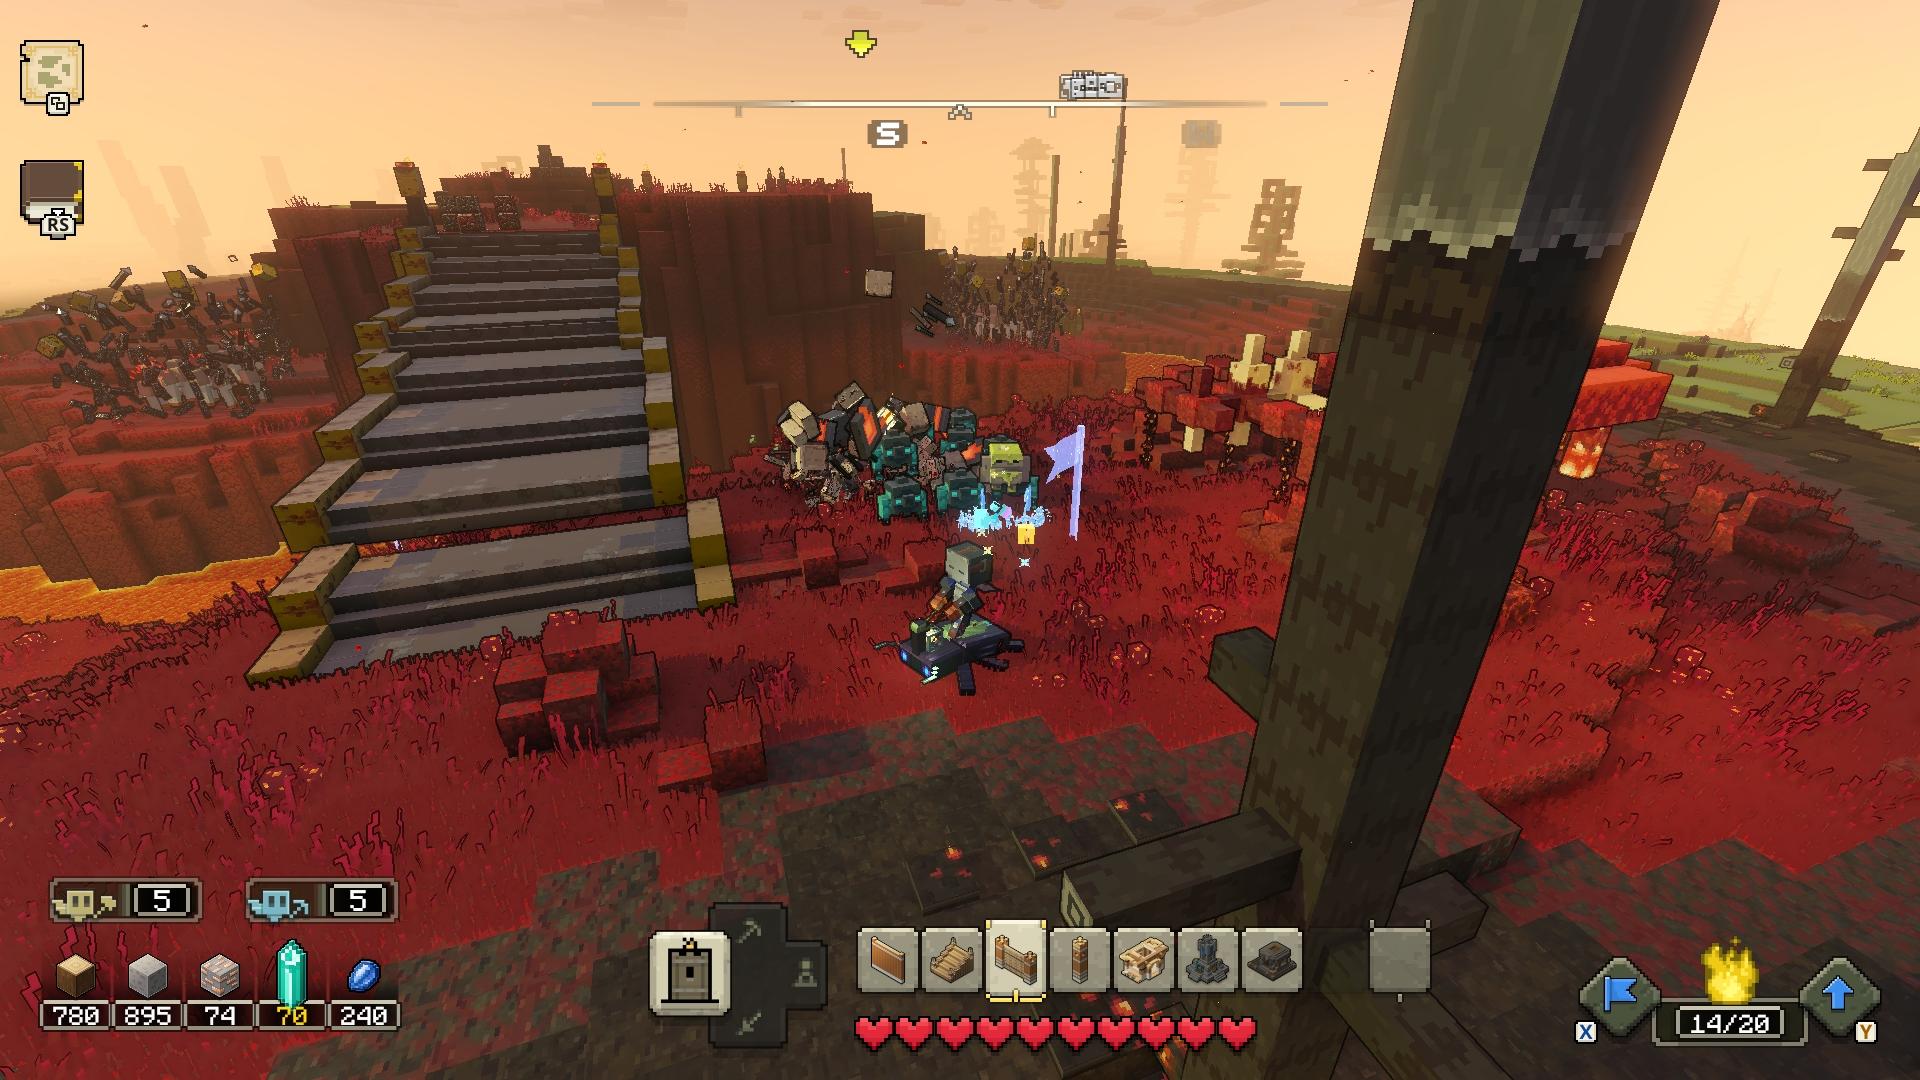 Minecraft Legends is a new action strategy game spin-off